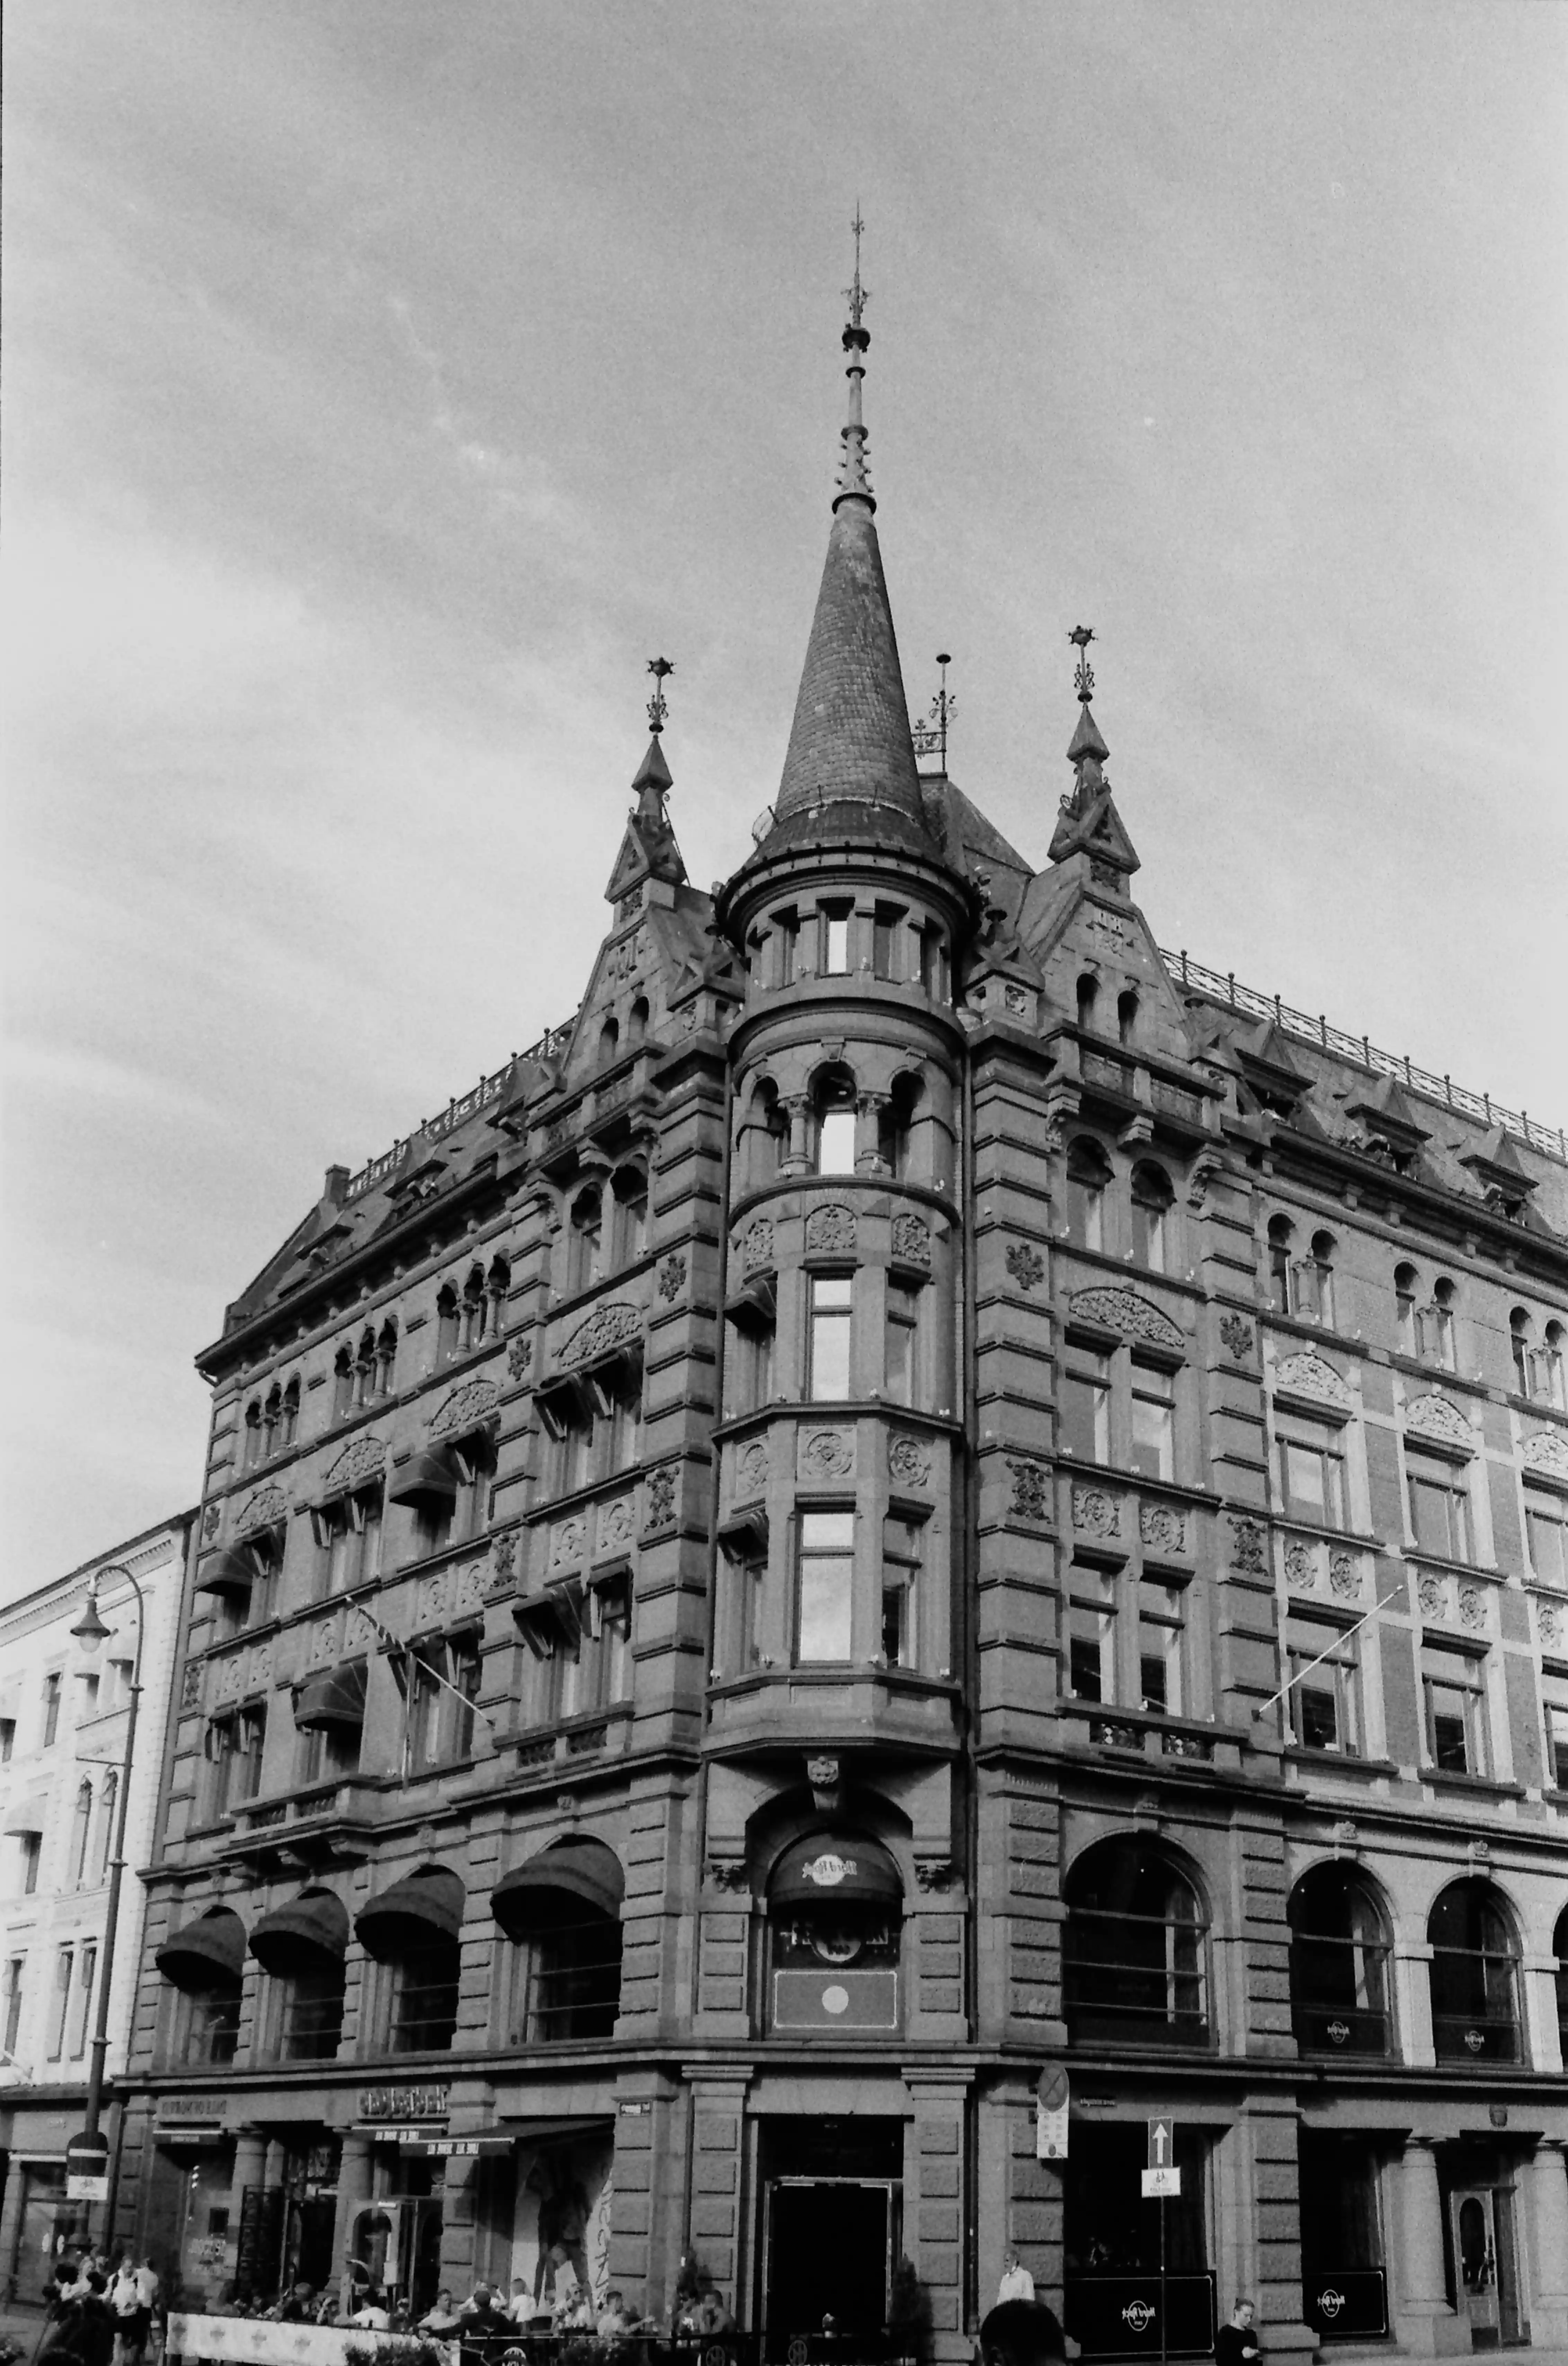 Black and white picture of a bulding with spires and ornamentations